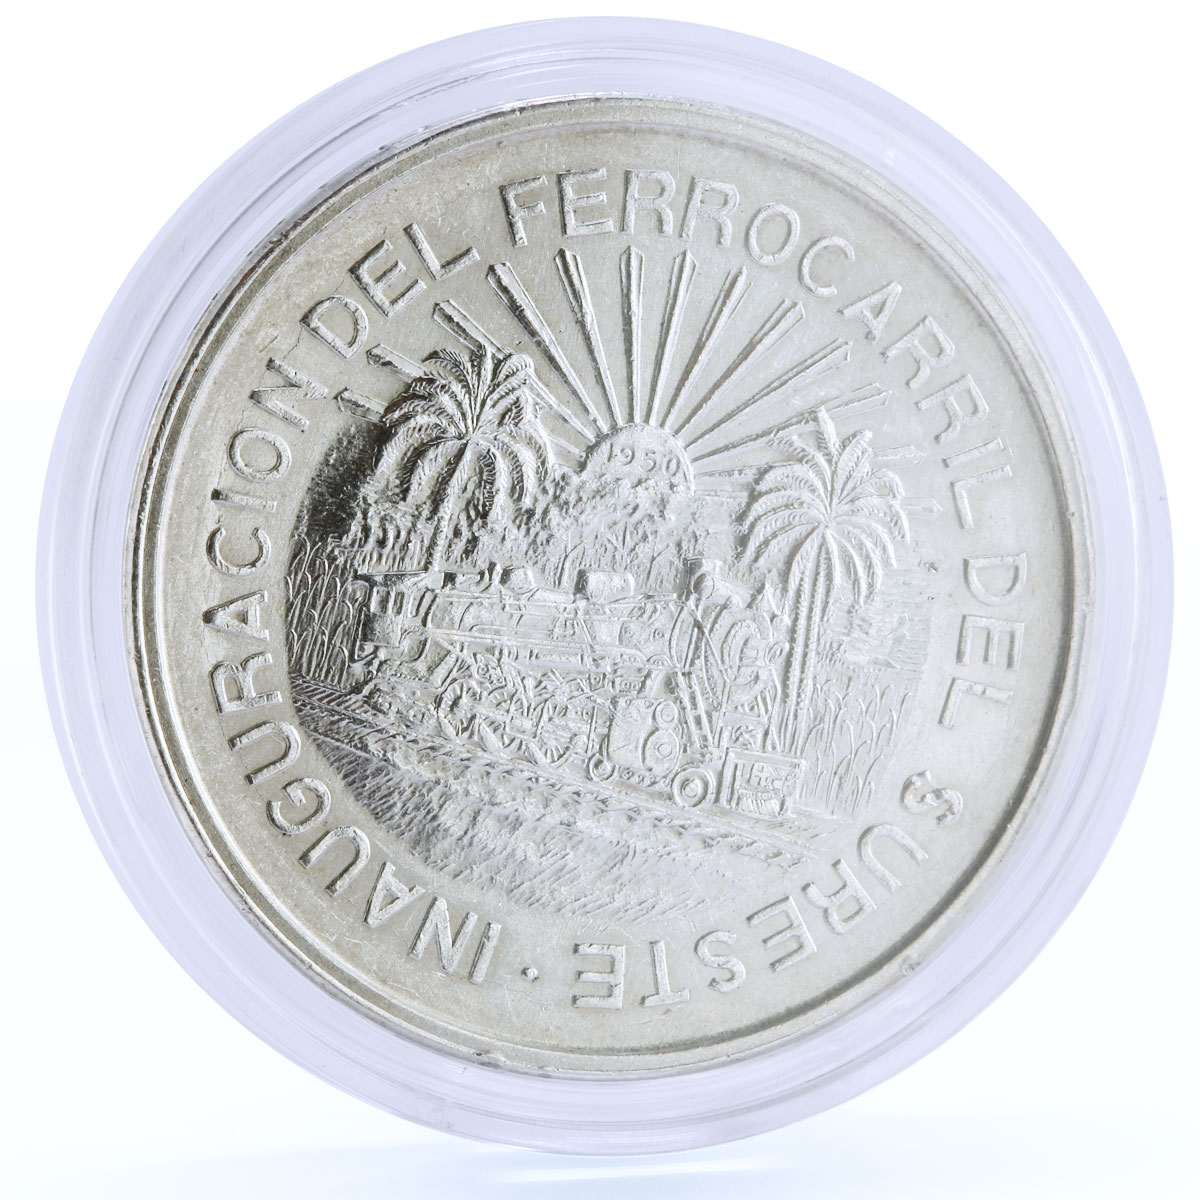 Mexico 5 pesos Opening of the Southeastern Railroad silver coin 1950